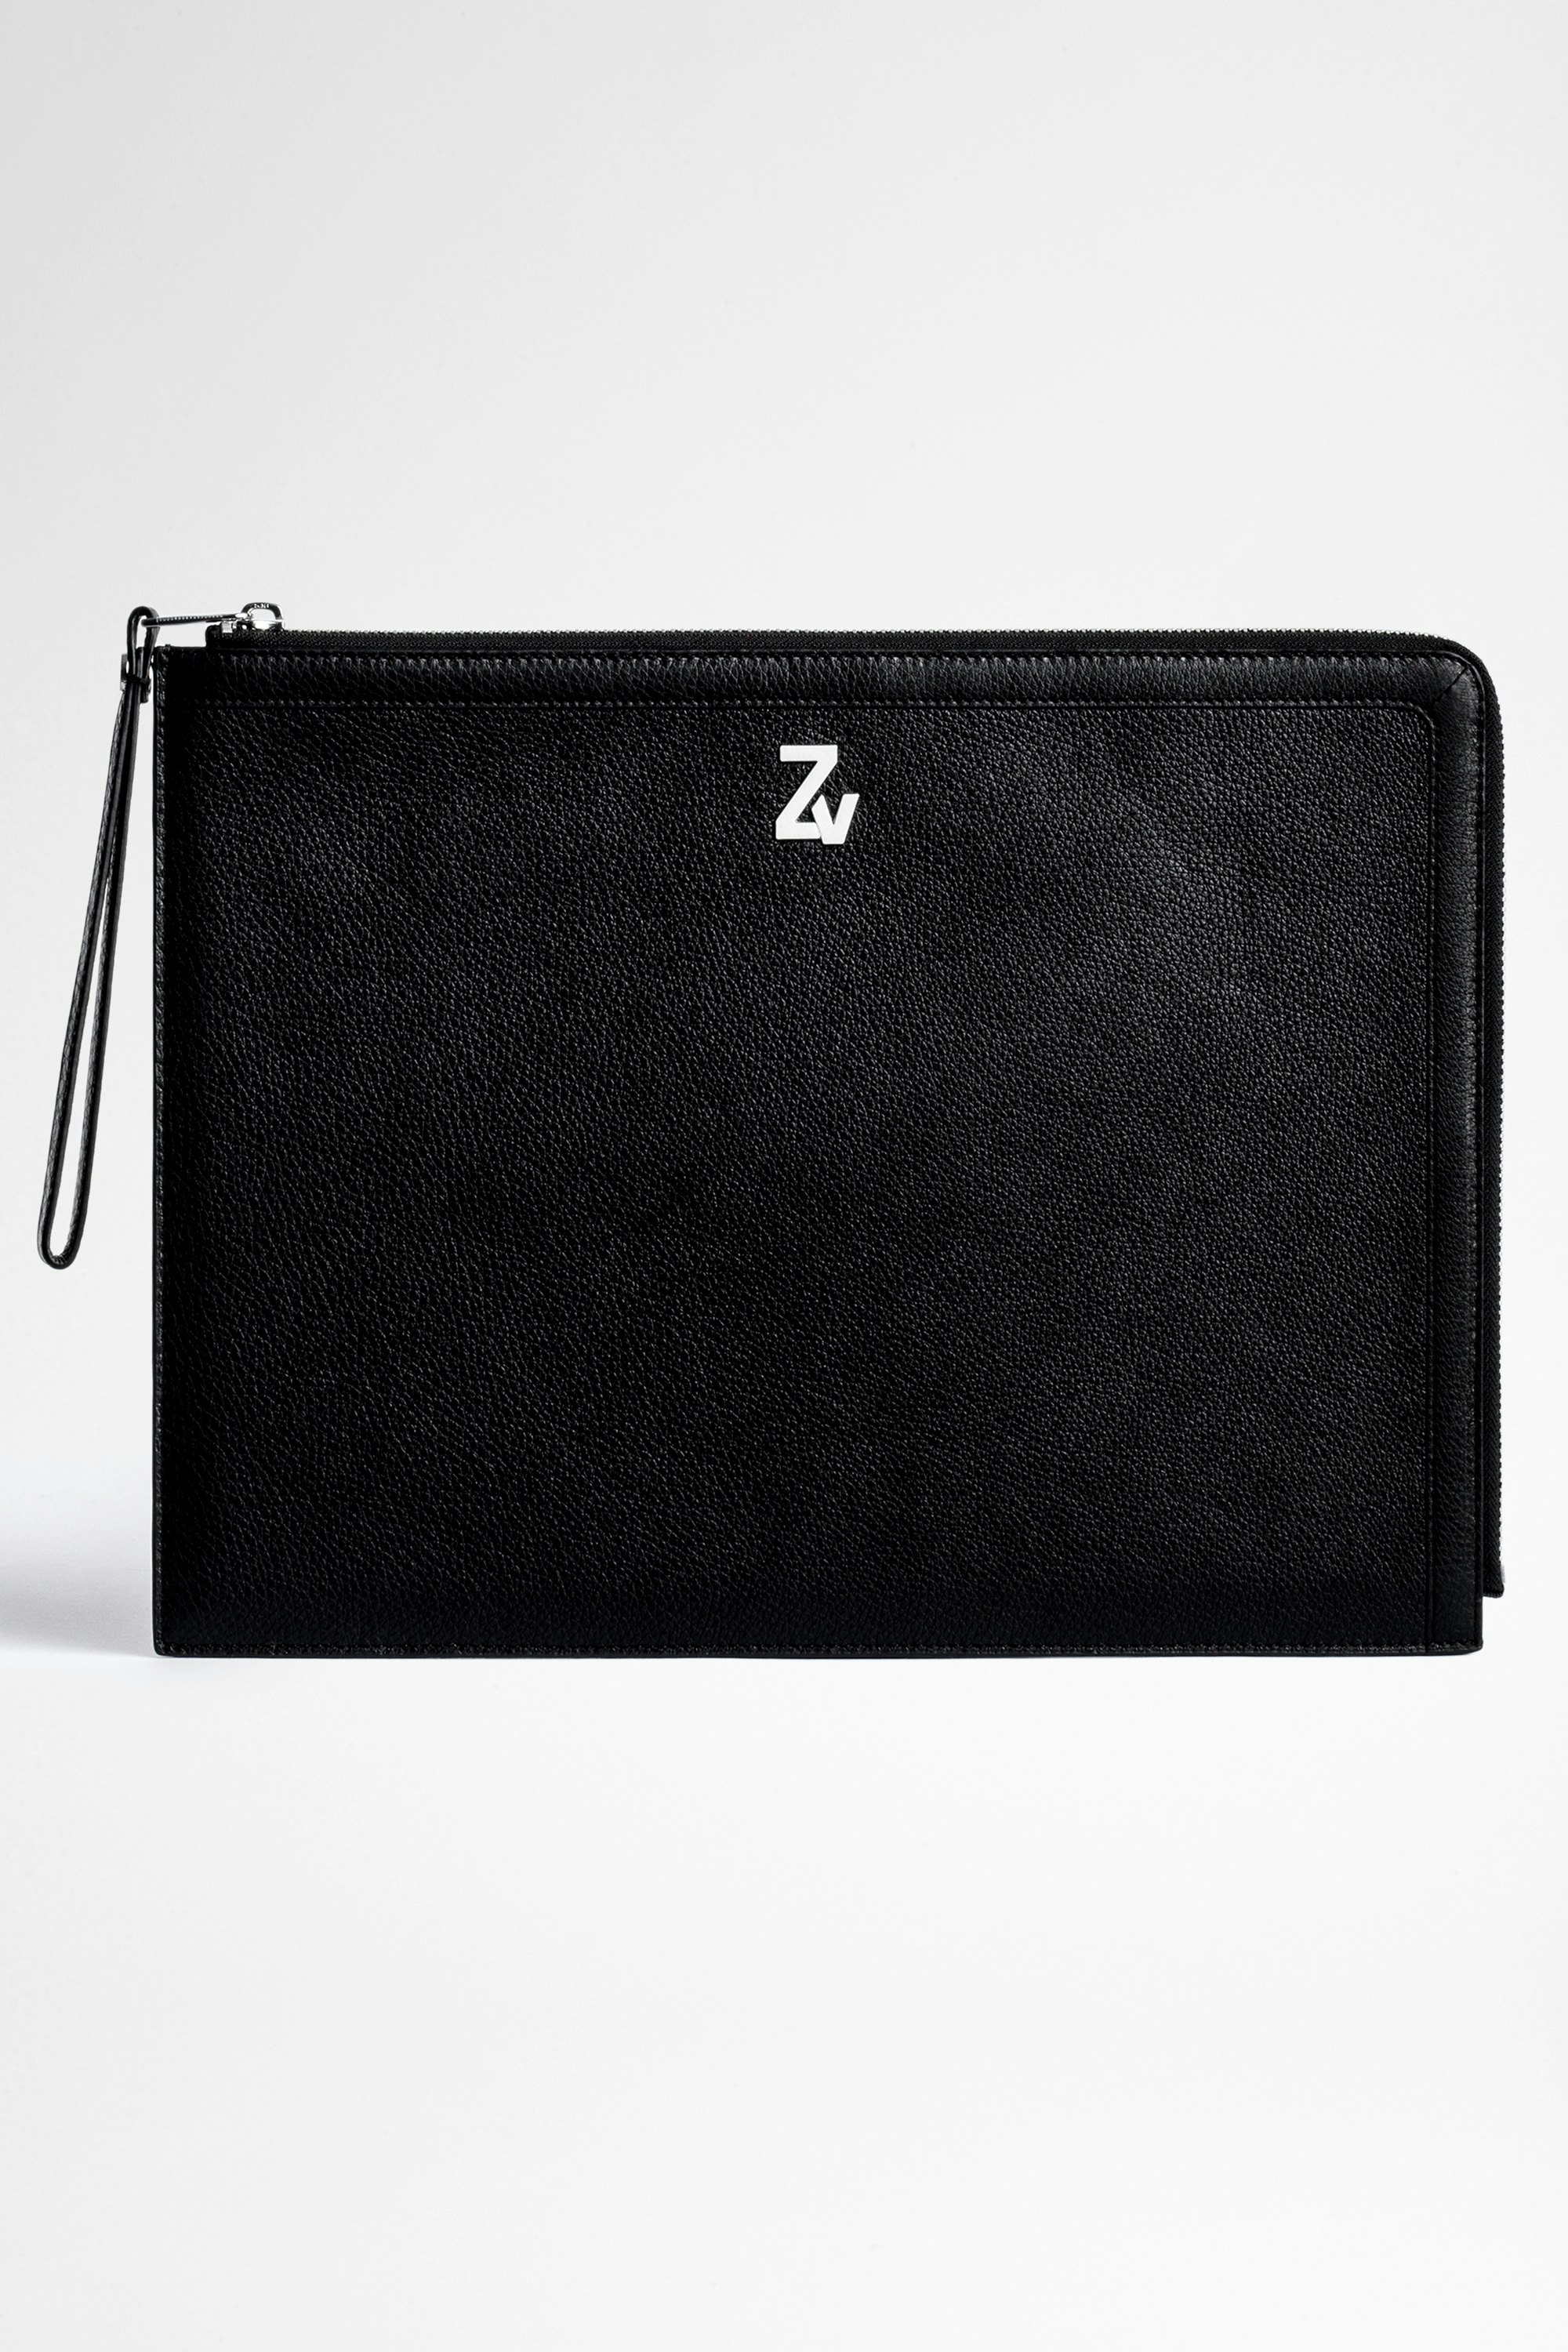 ZV Initiale John バッグ Men's black leather pouch